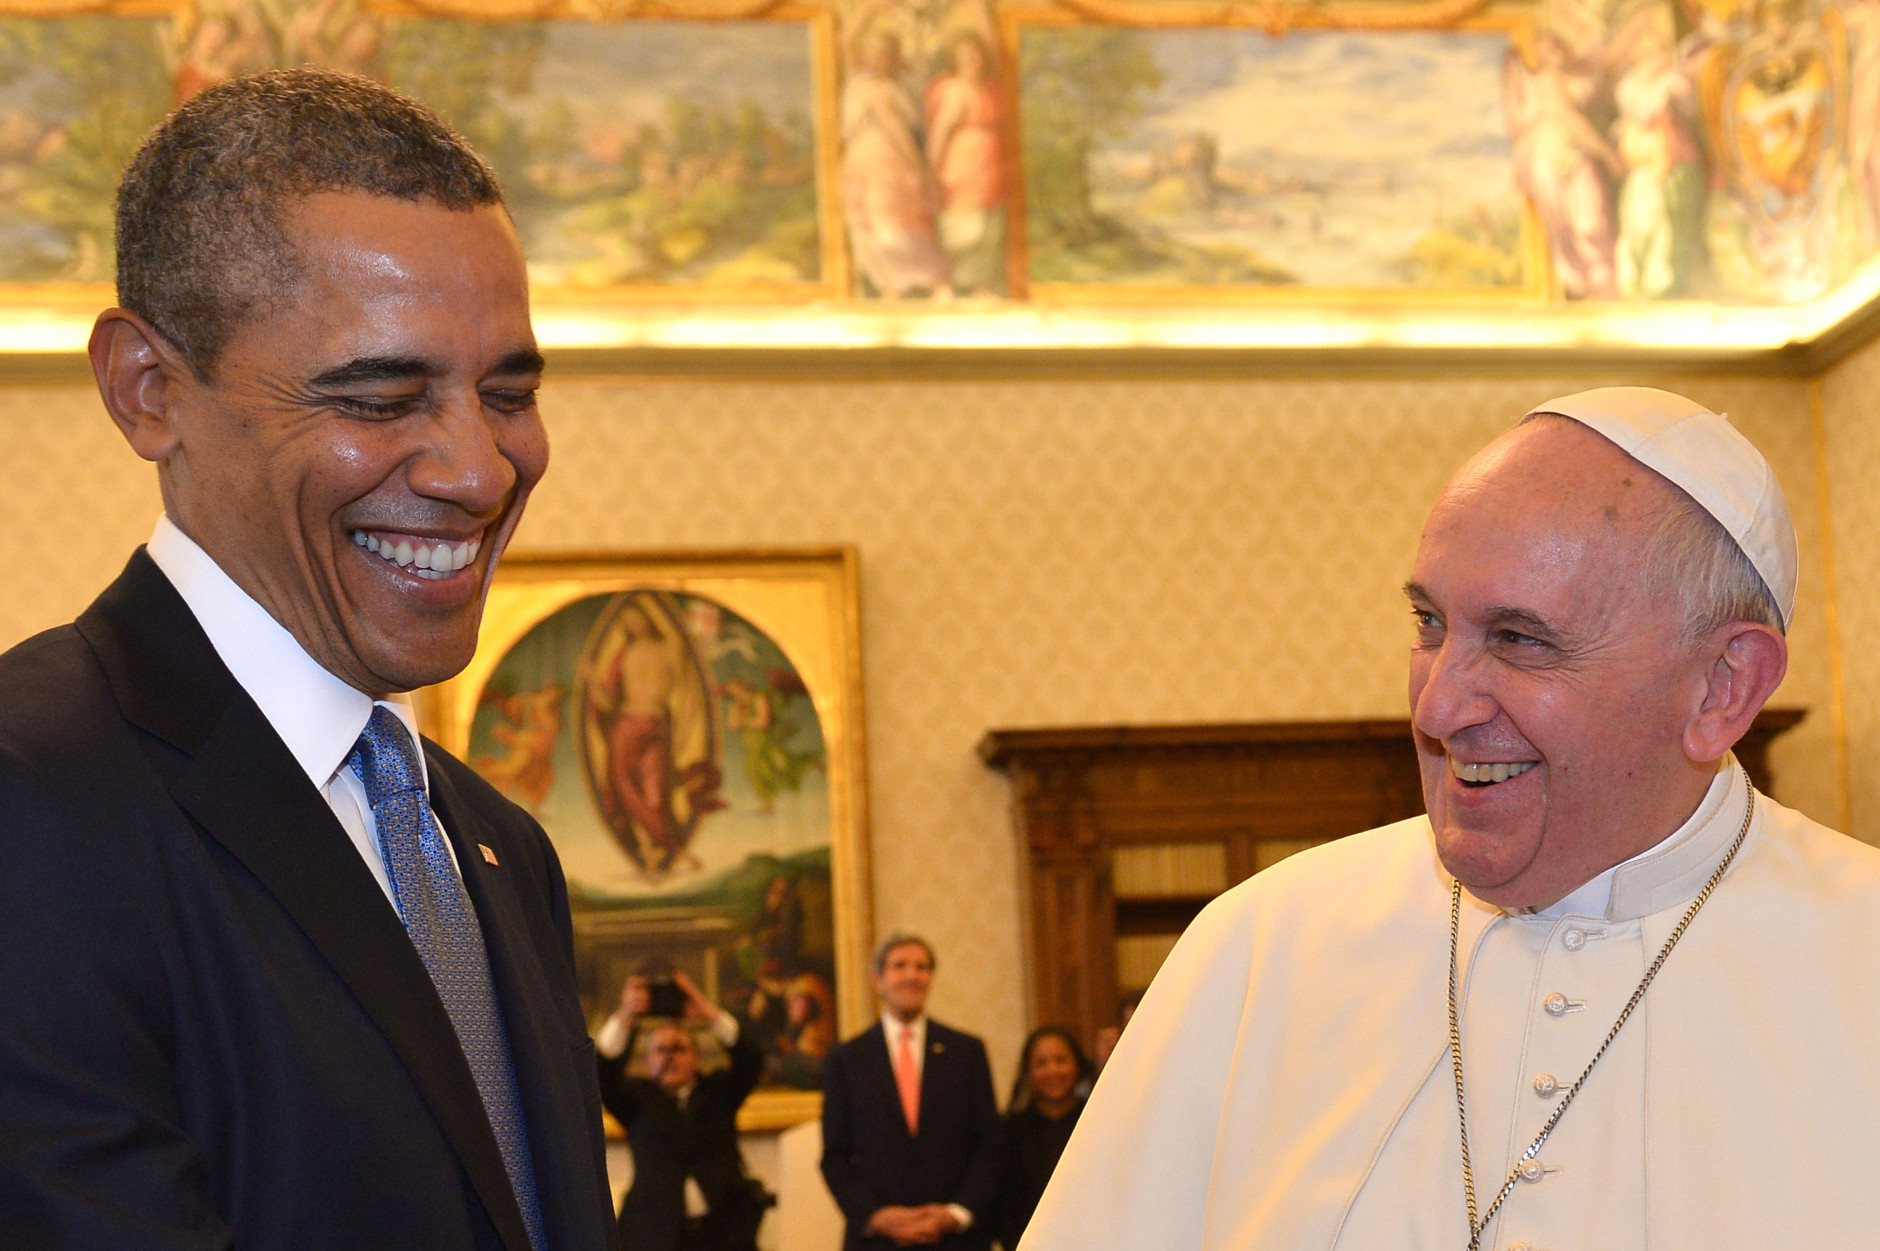 FOR USE AS DESIRED, YEAR END PHOTOS - FILE - Pope Francis and President Barack Obama smile as they meet at the Vatican Thursday, March 27, 2014. A visibly energized President Barack Obama held a nearly hourlong audience with Pope Francis at the Vatican, expressing his great admiration for the pontiff and inviting him to visit the White House. (AP Photo/Gabriel Bouys, File Pool)